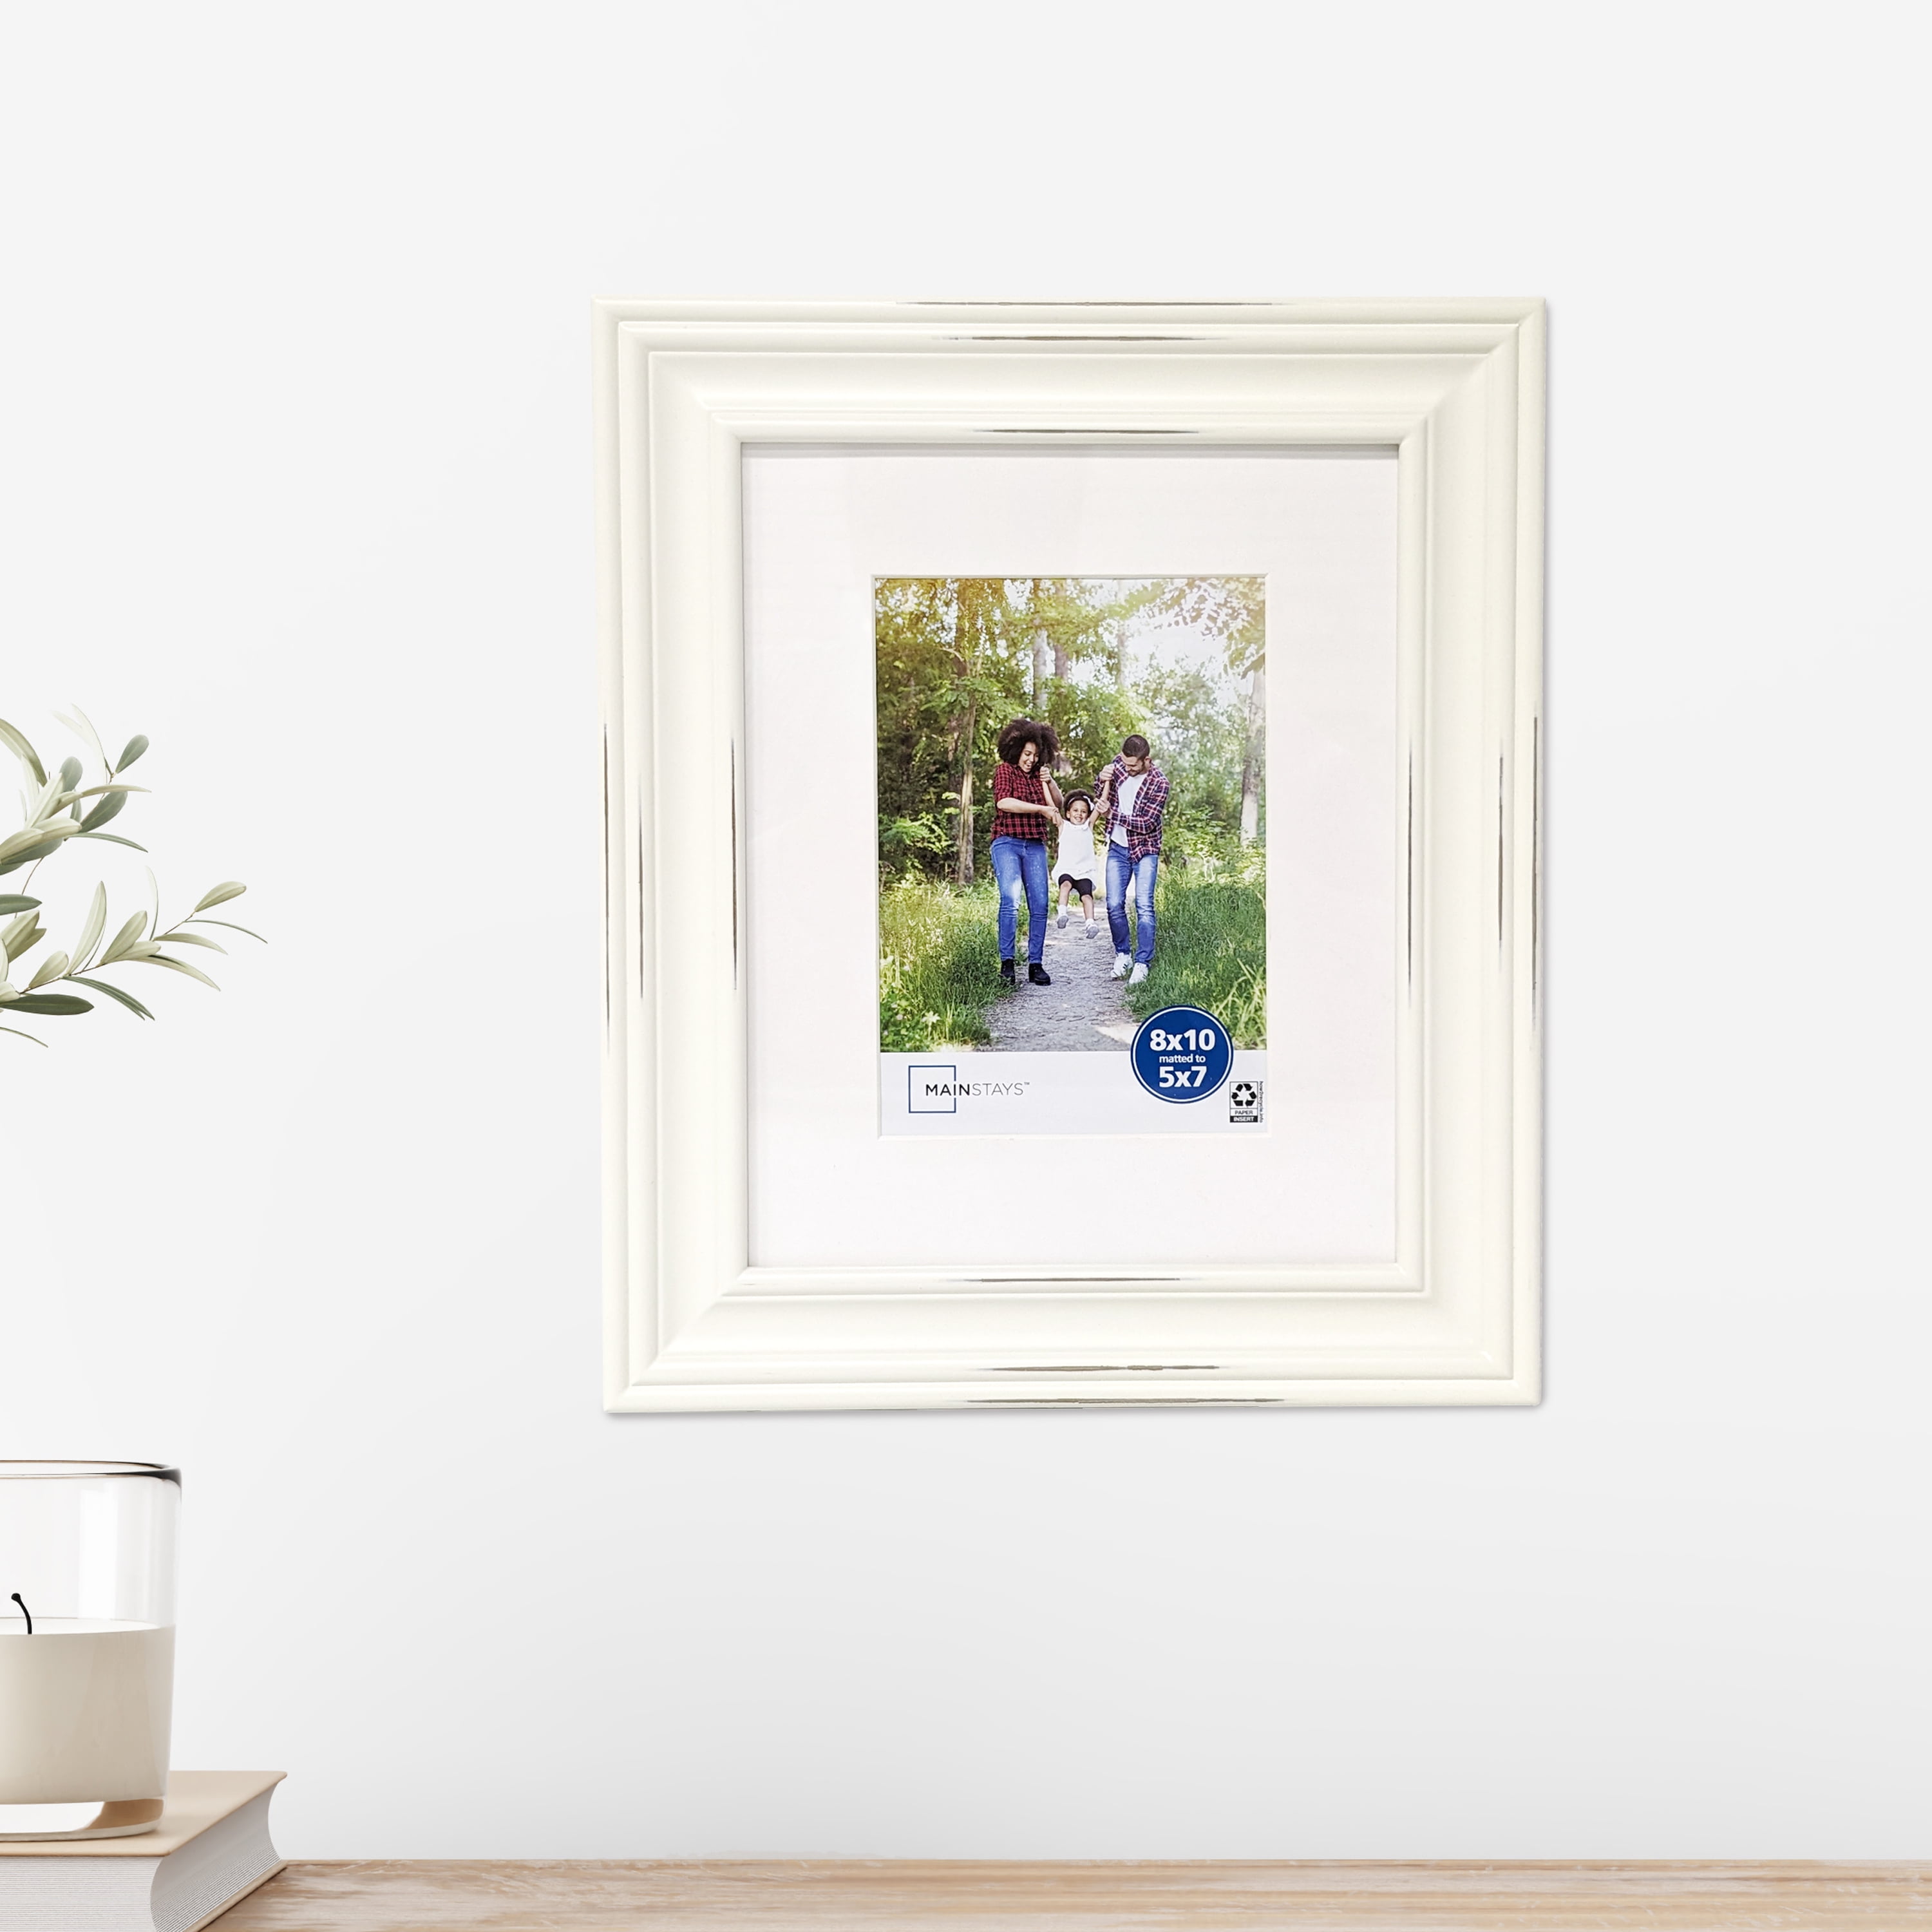 Printz At Home Matted Picture Frame, 8 x 10 / 5 x 7 in - Kroger